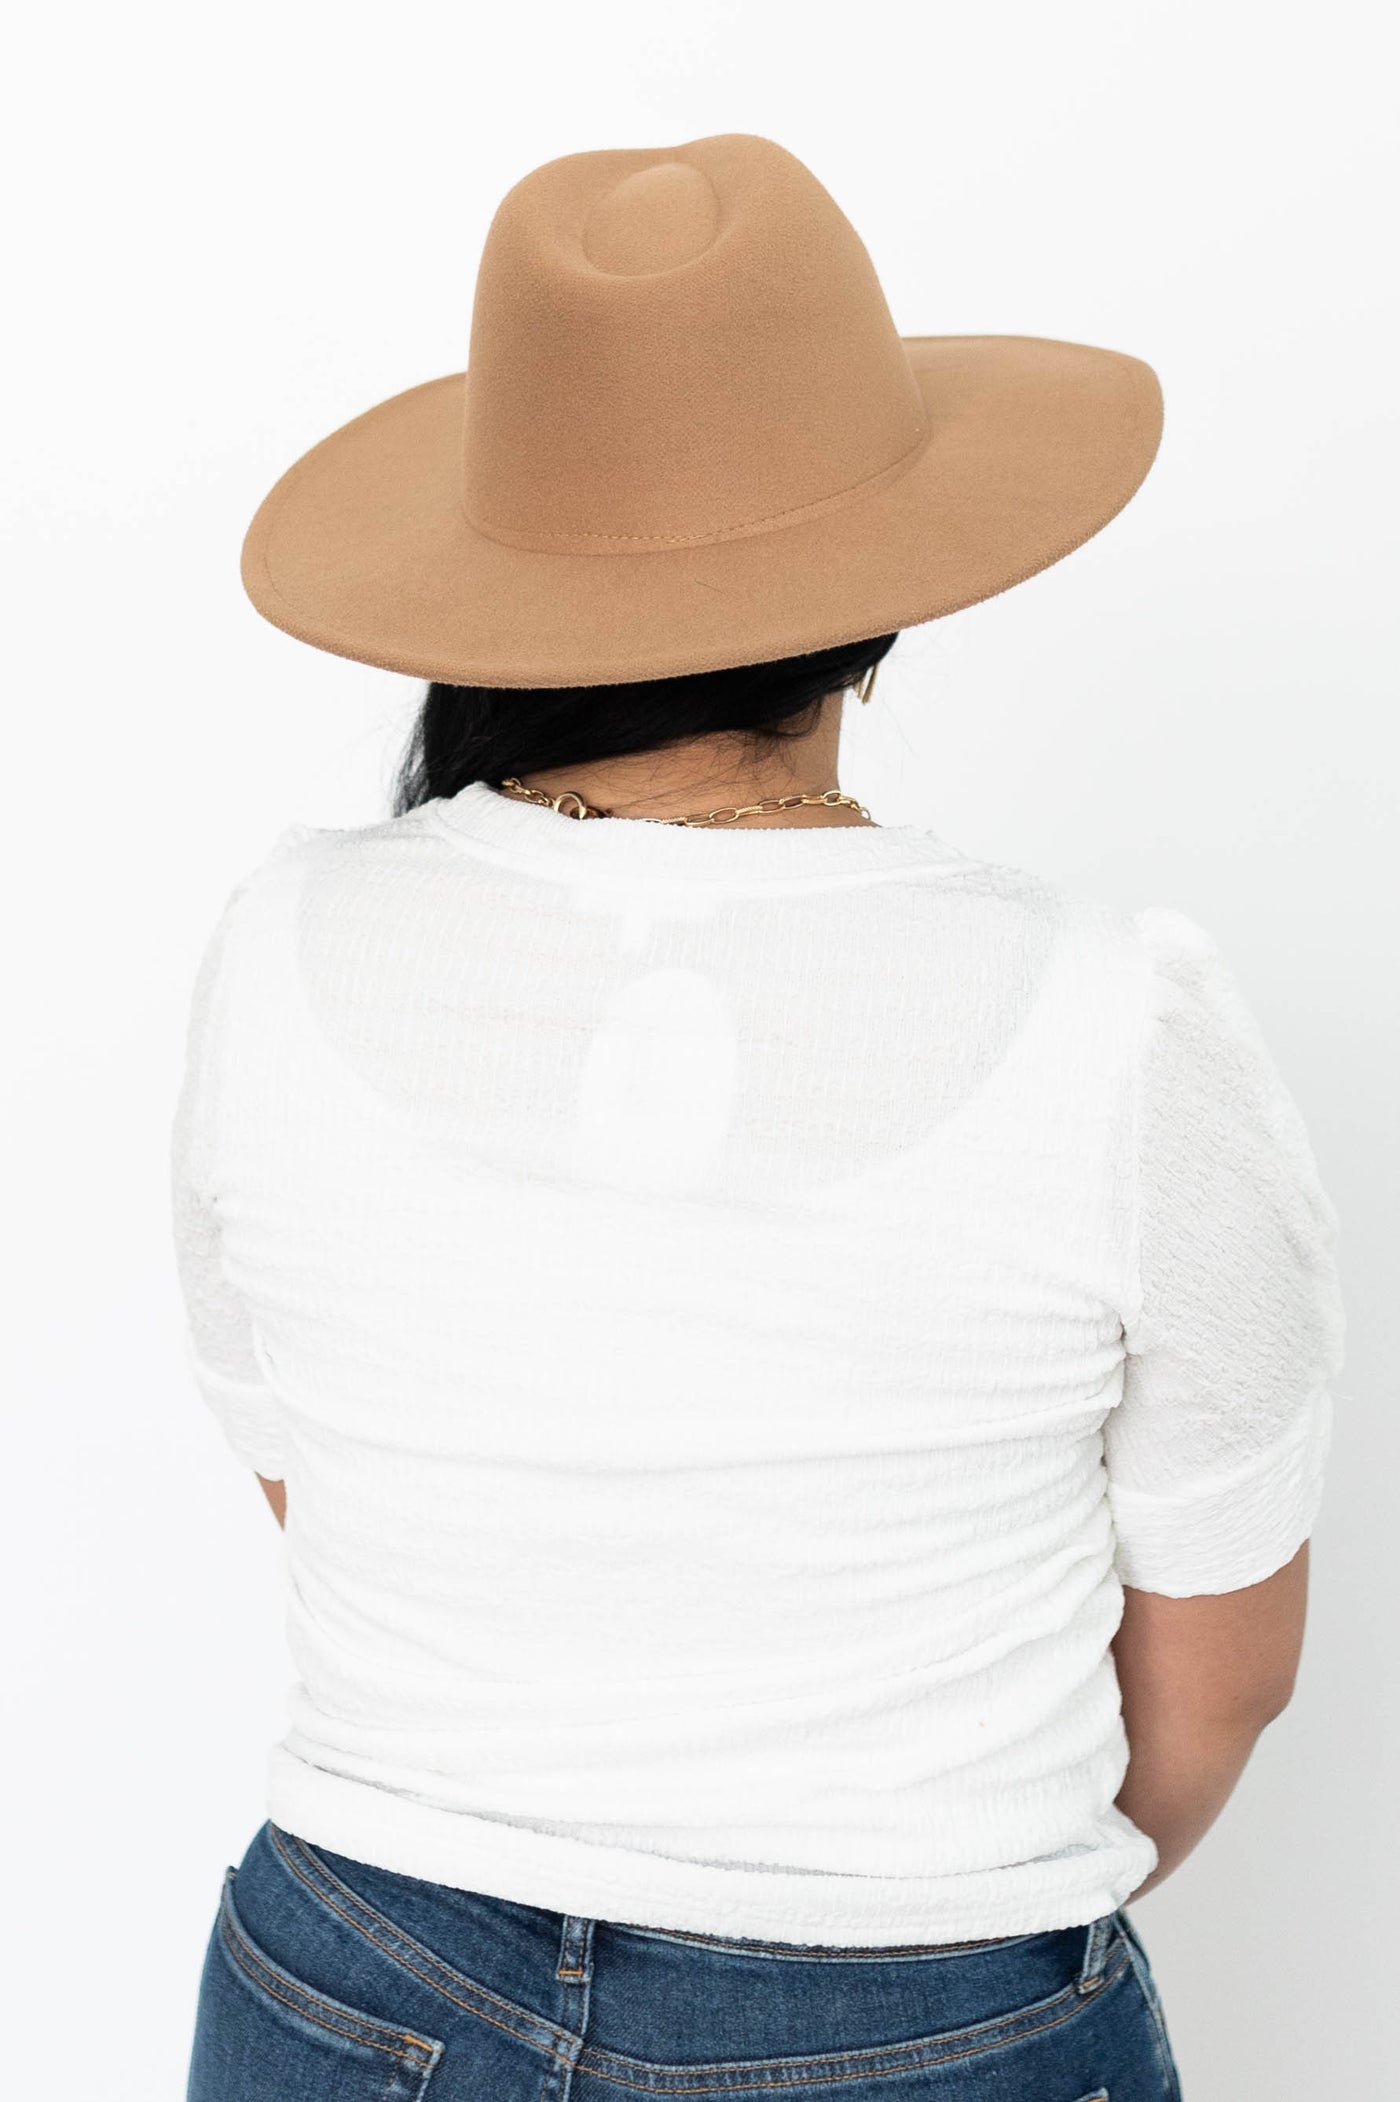 Back view of a white top